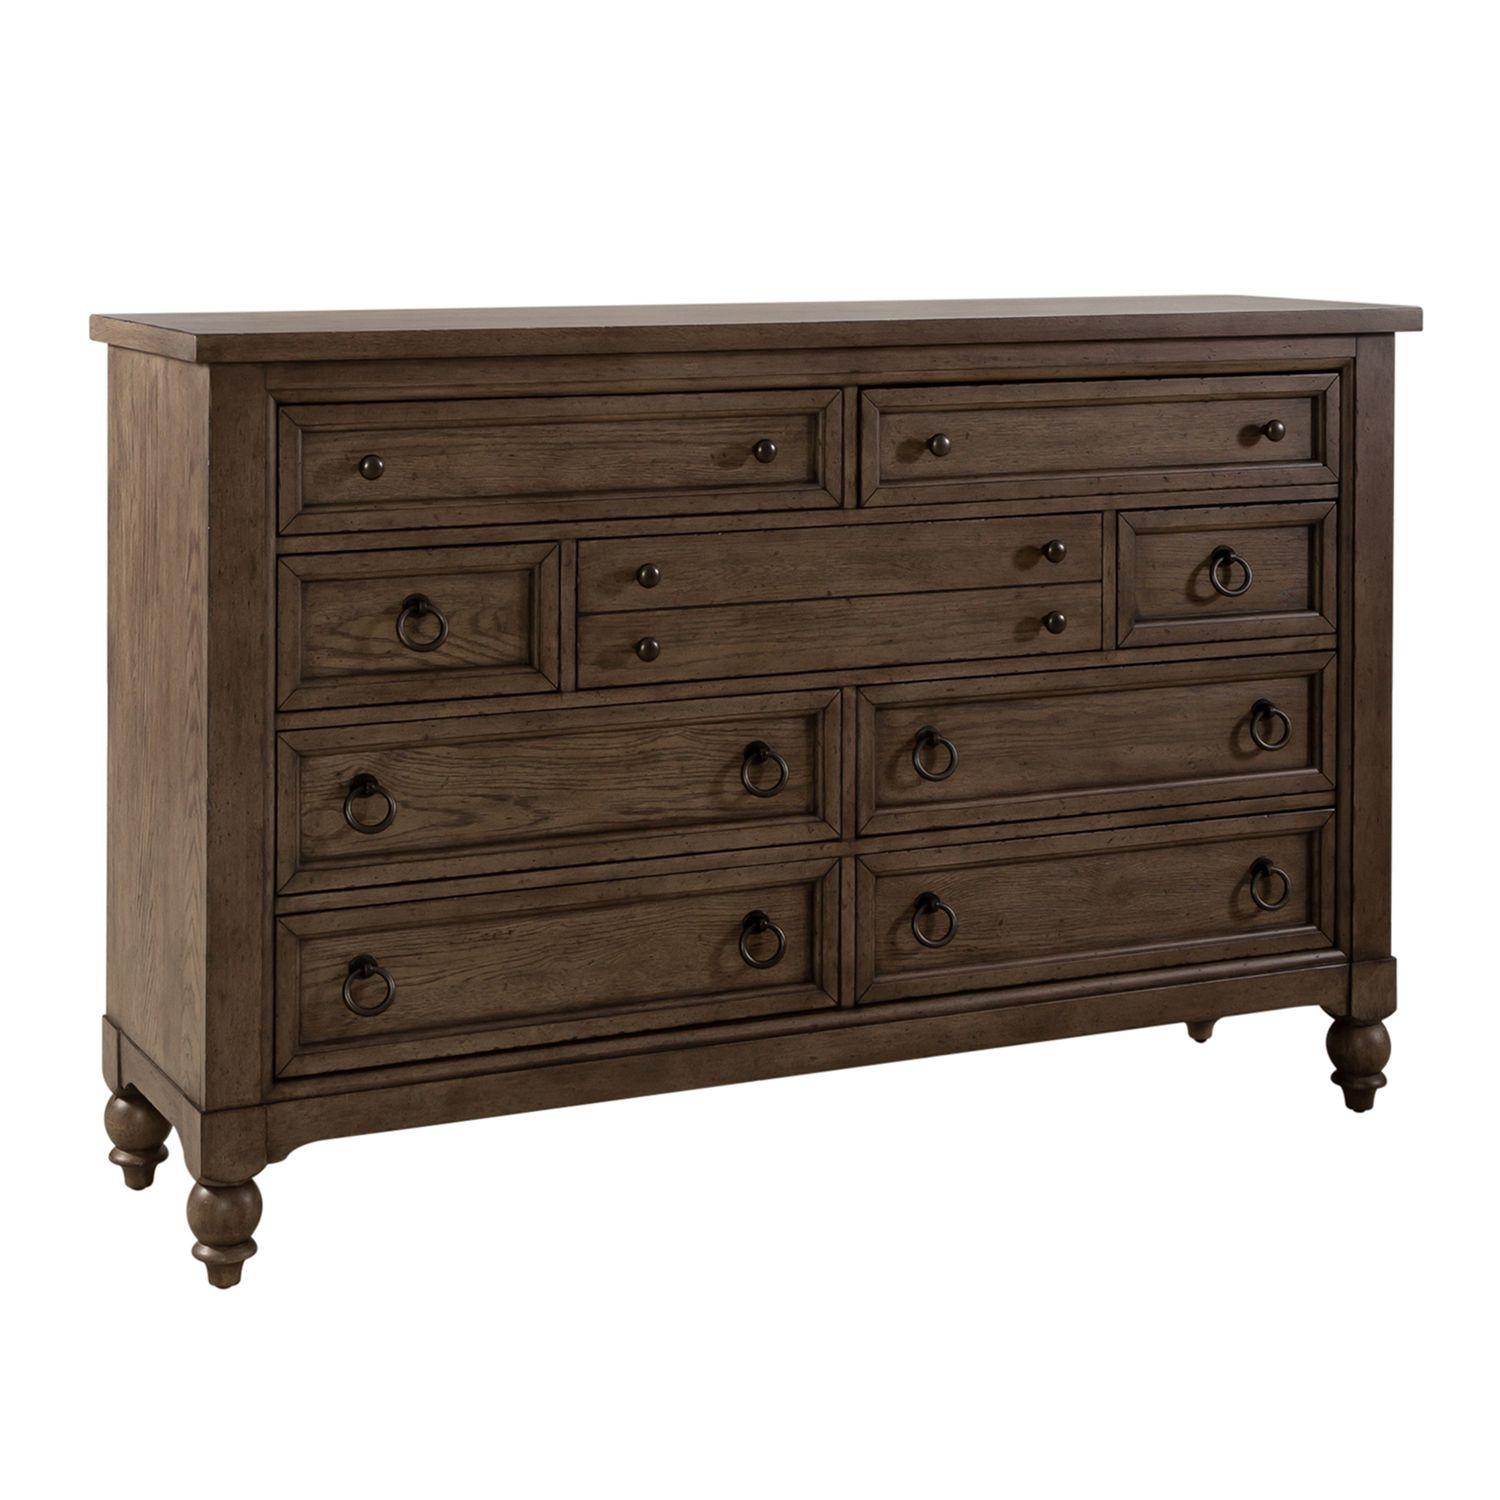 Transitional Dresser Americana Farmhouse (615-BR) 615-BR31 in Taupe 